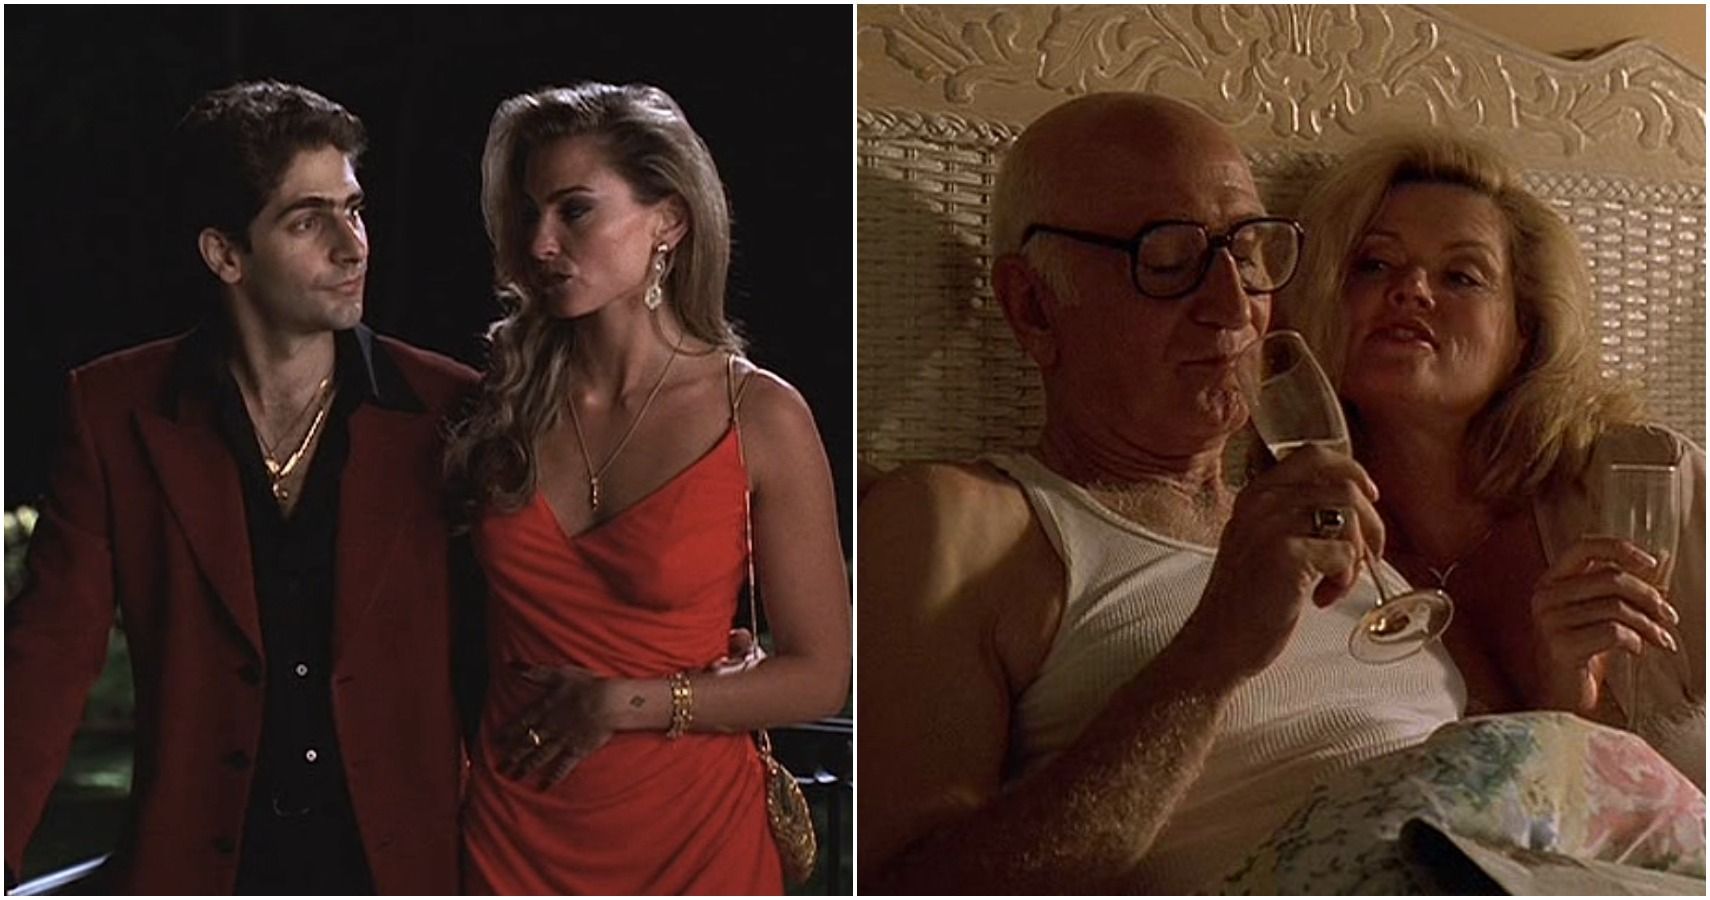 The Sopranos The 10 Most Questionable Dating Choices